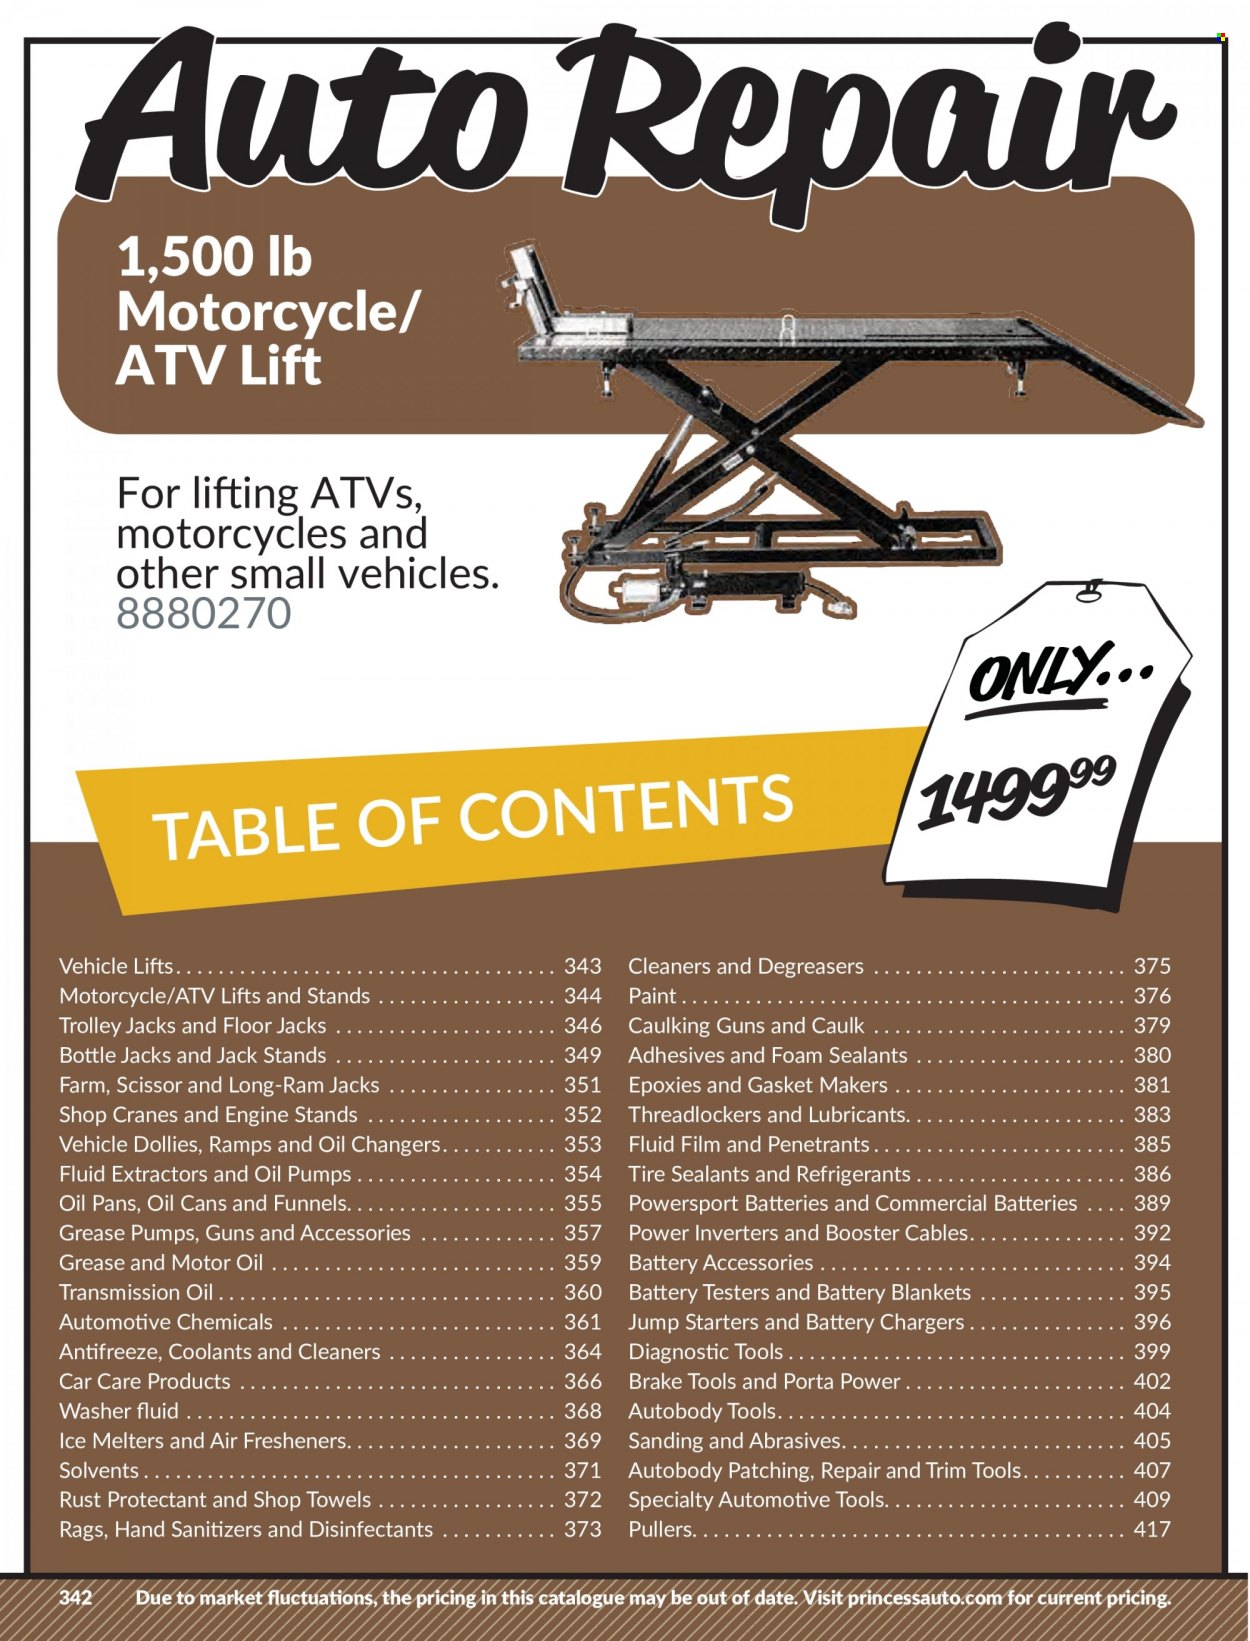 Princess Auto Flyer - Sales products - scissors, blanket, trolley, vehicle, motorcycle, battery charger, booster cables, air freshener, antifreeze, washer fluid, motor oil. Page 350.